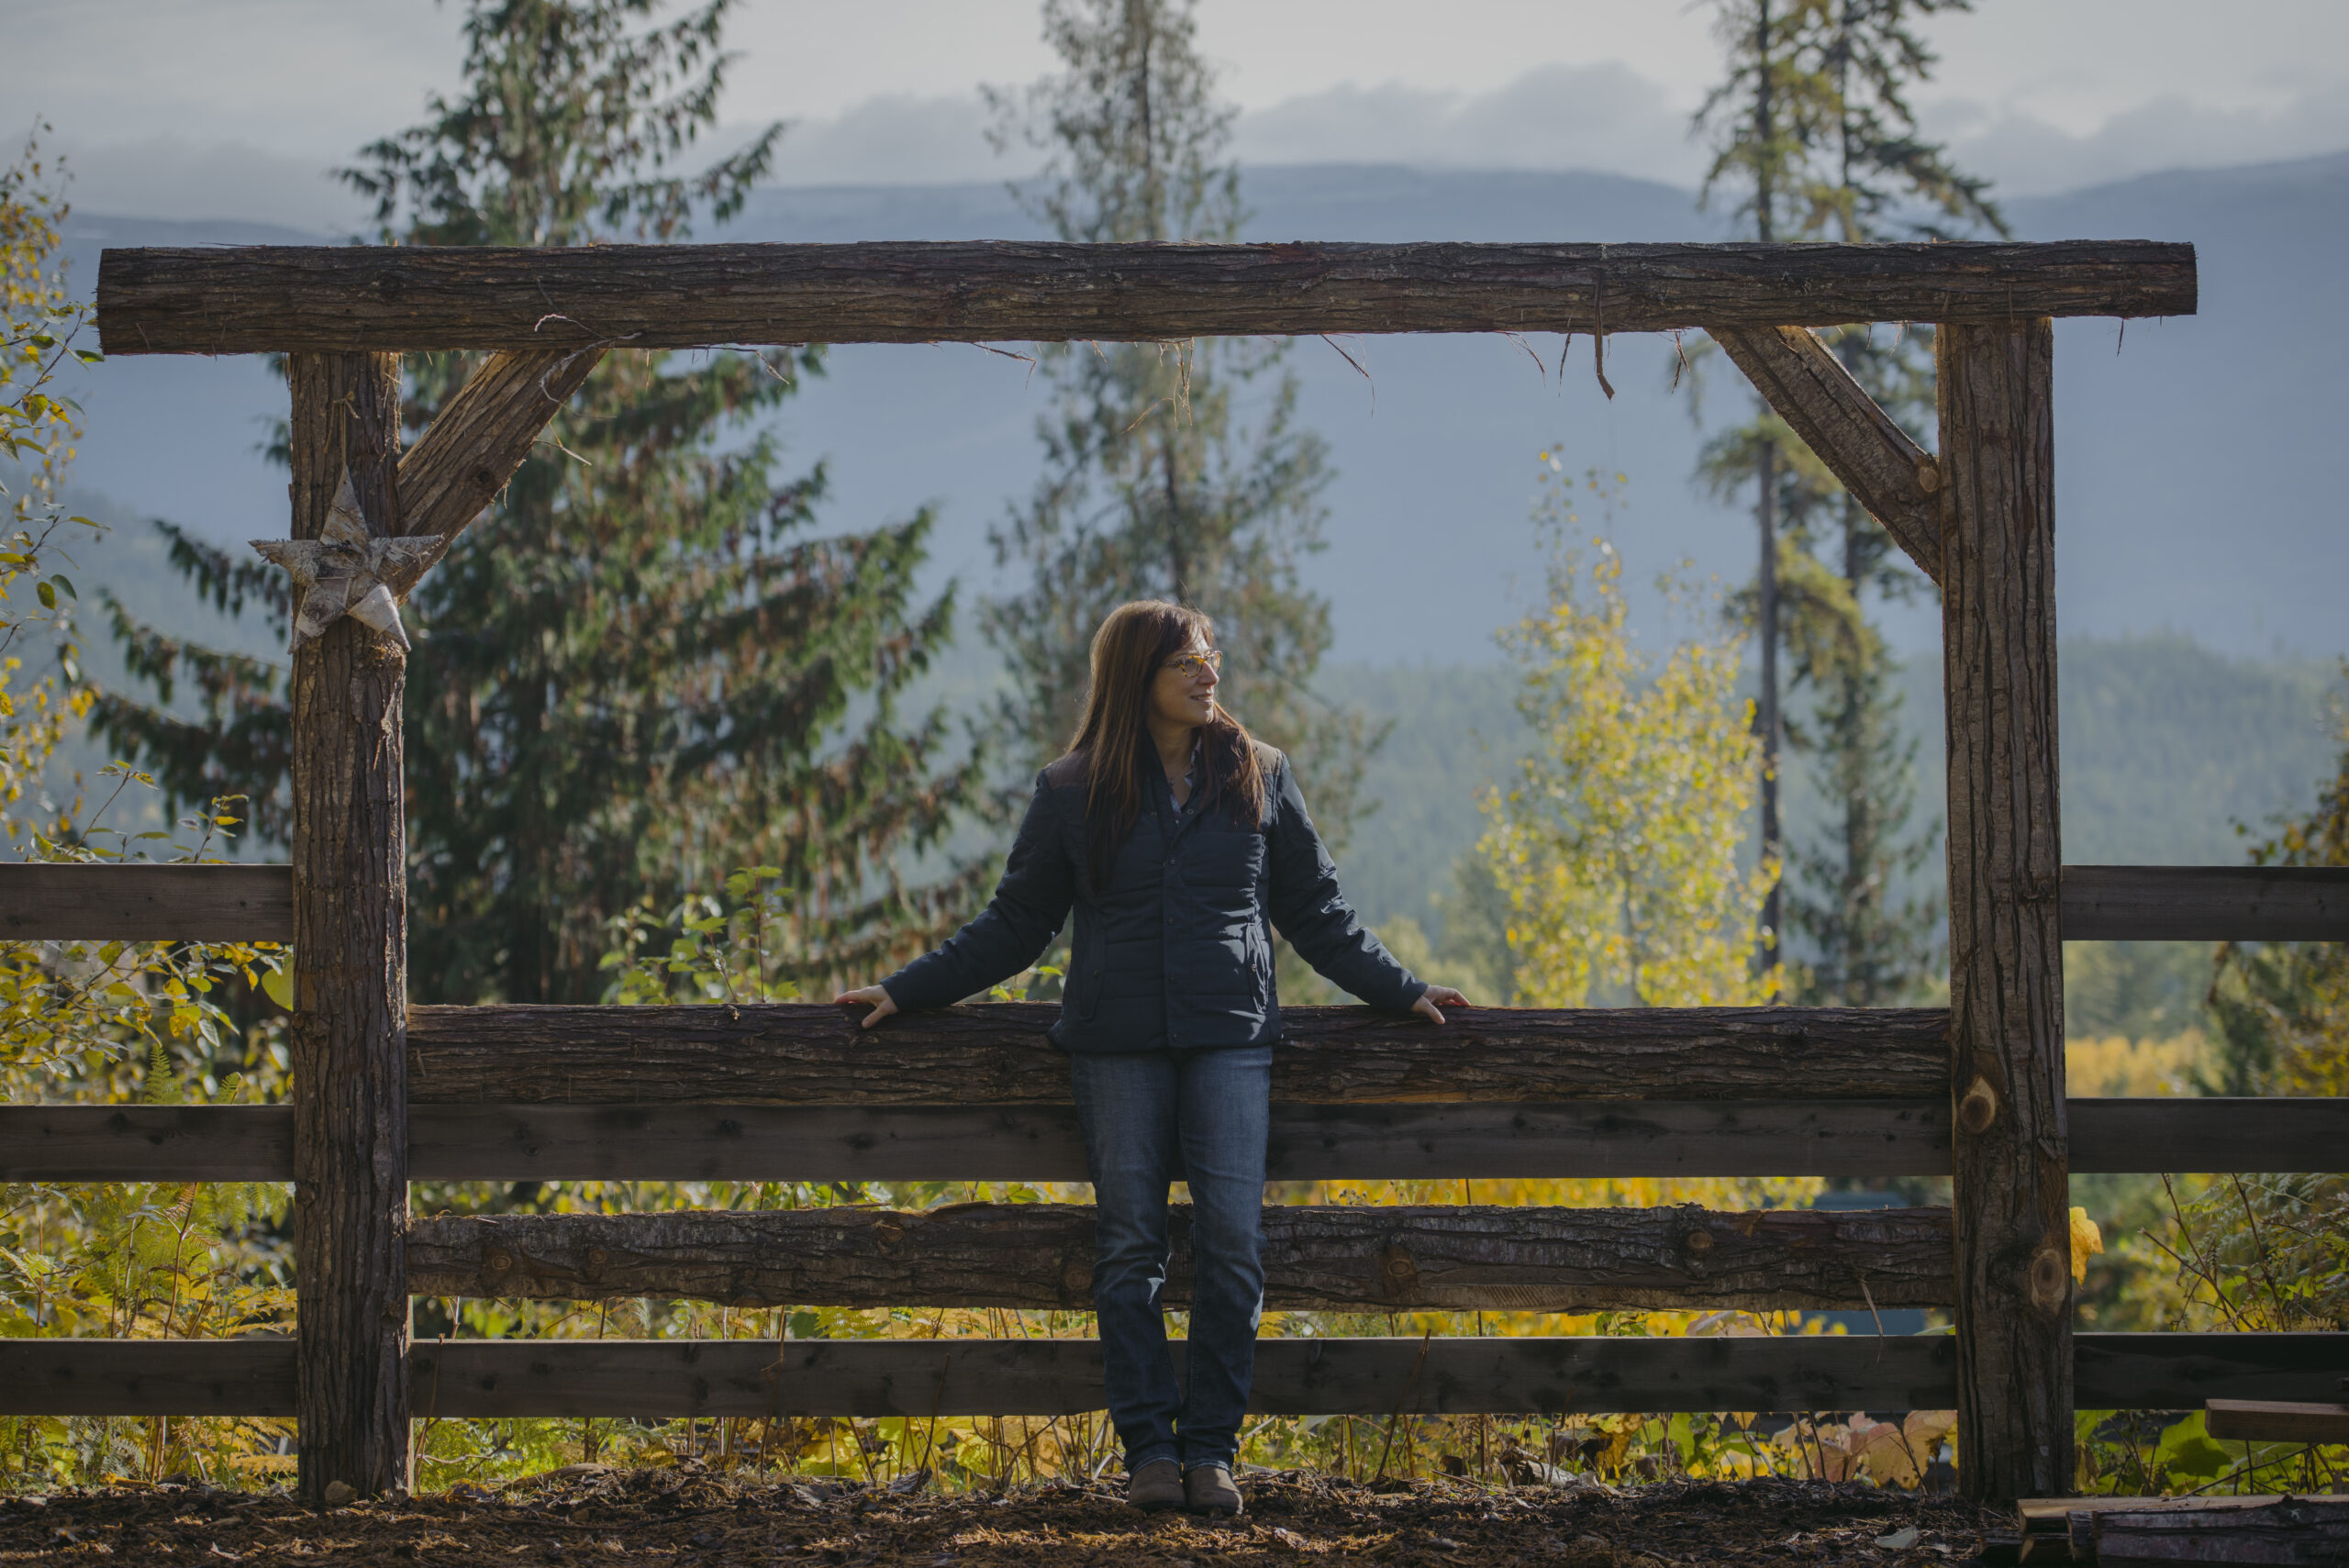 A woman leaning on a wooden fence with trees and mountains in the background.